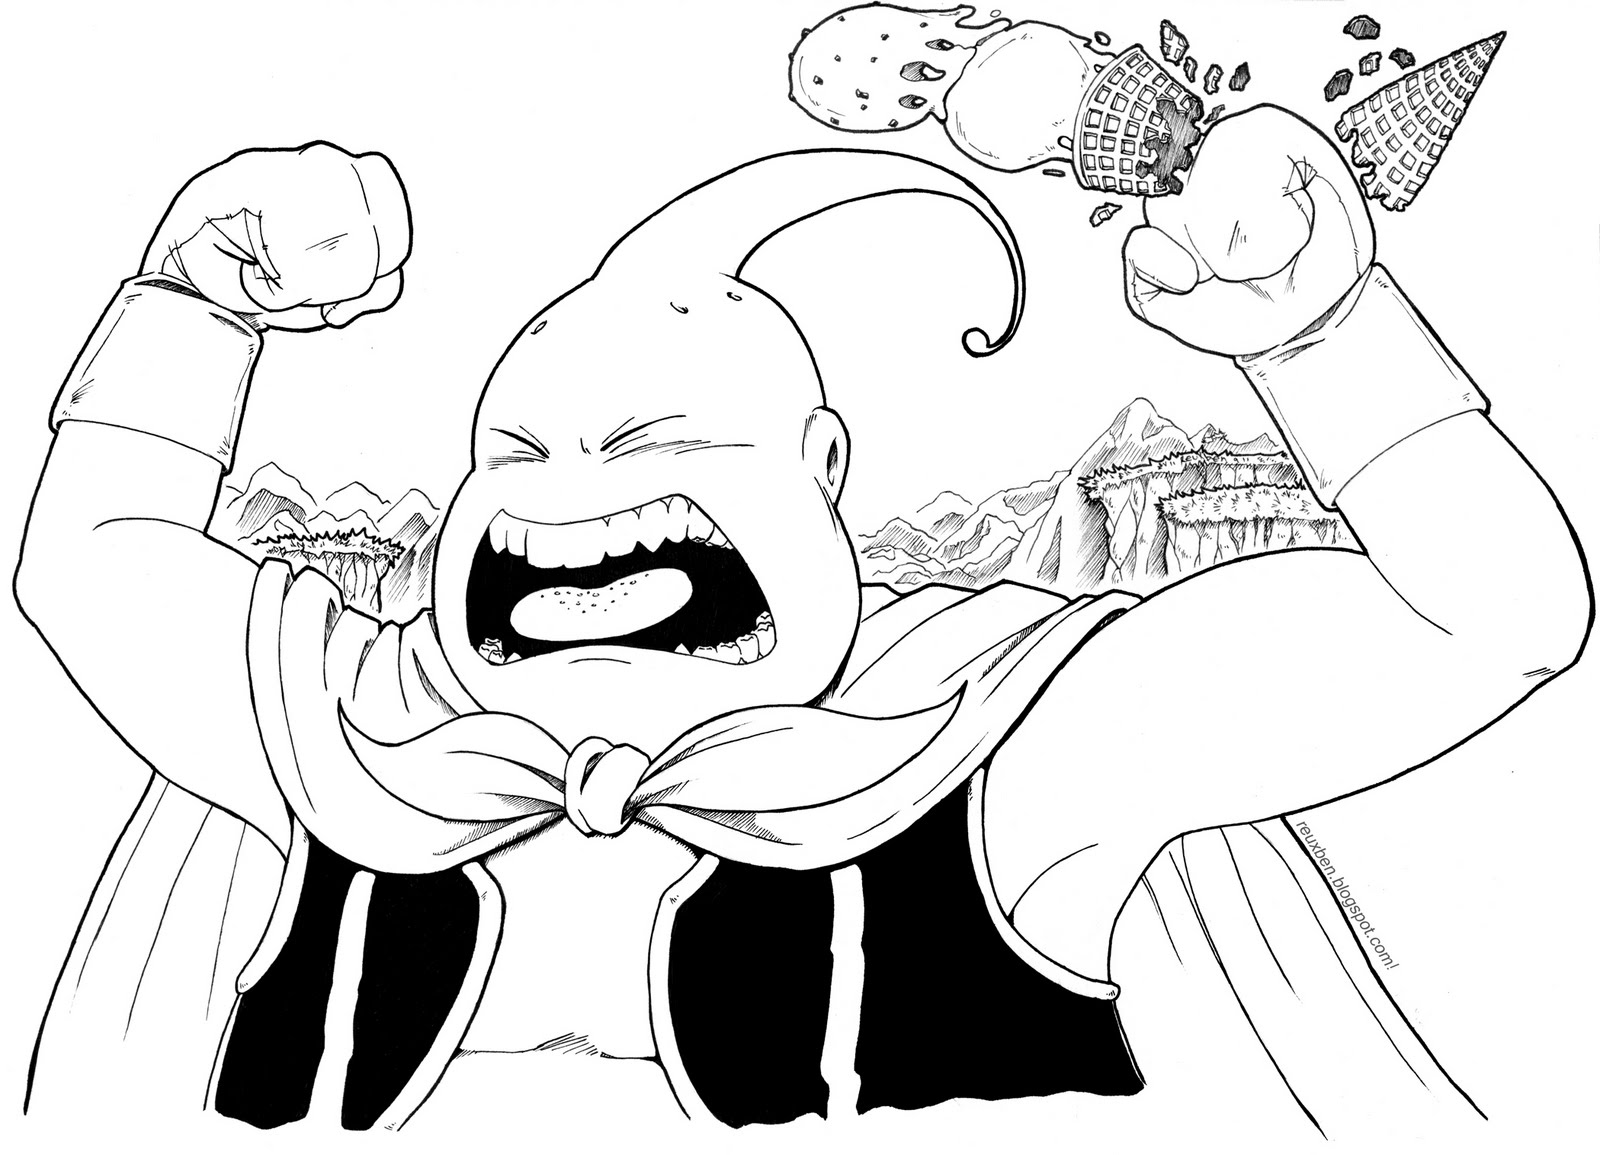 dyndns org kid buu tagged as kid buu colouring pages - Anny Imagenes!